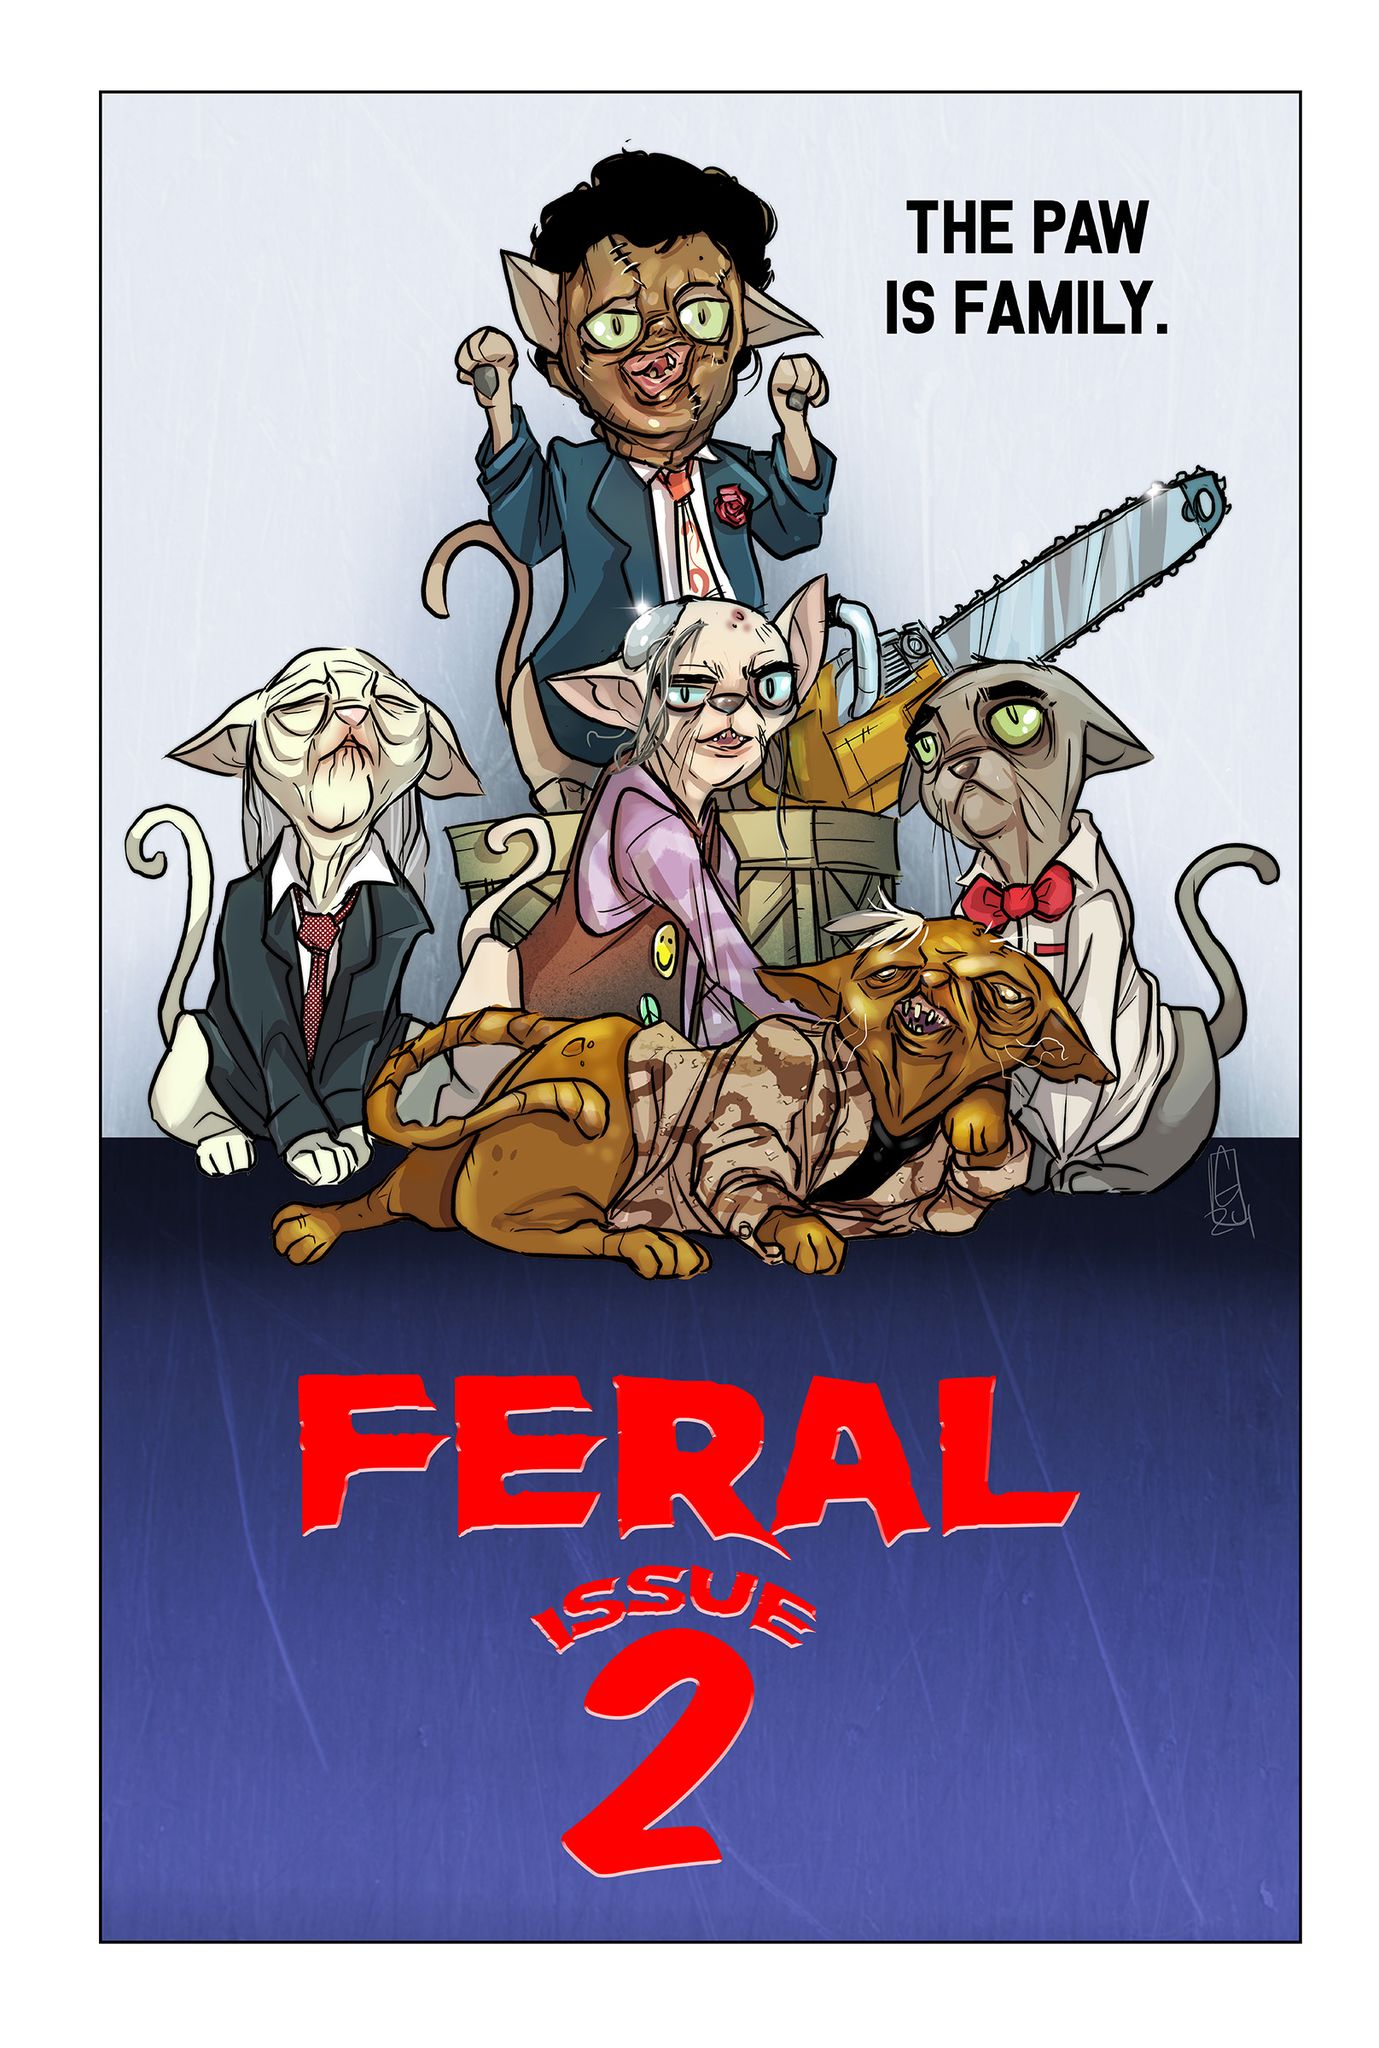 FERAL #2 CHRIS GUGLIOTTI EXCLUSIVE HOMAGE TO THE TEXAS CHAINSAW MASSACRE PT2 - 04/24/24